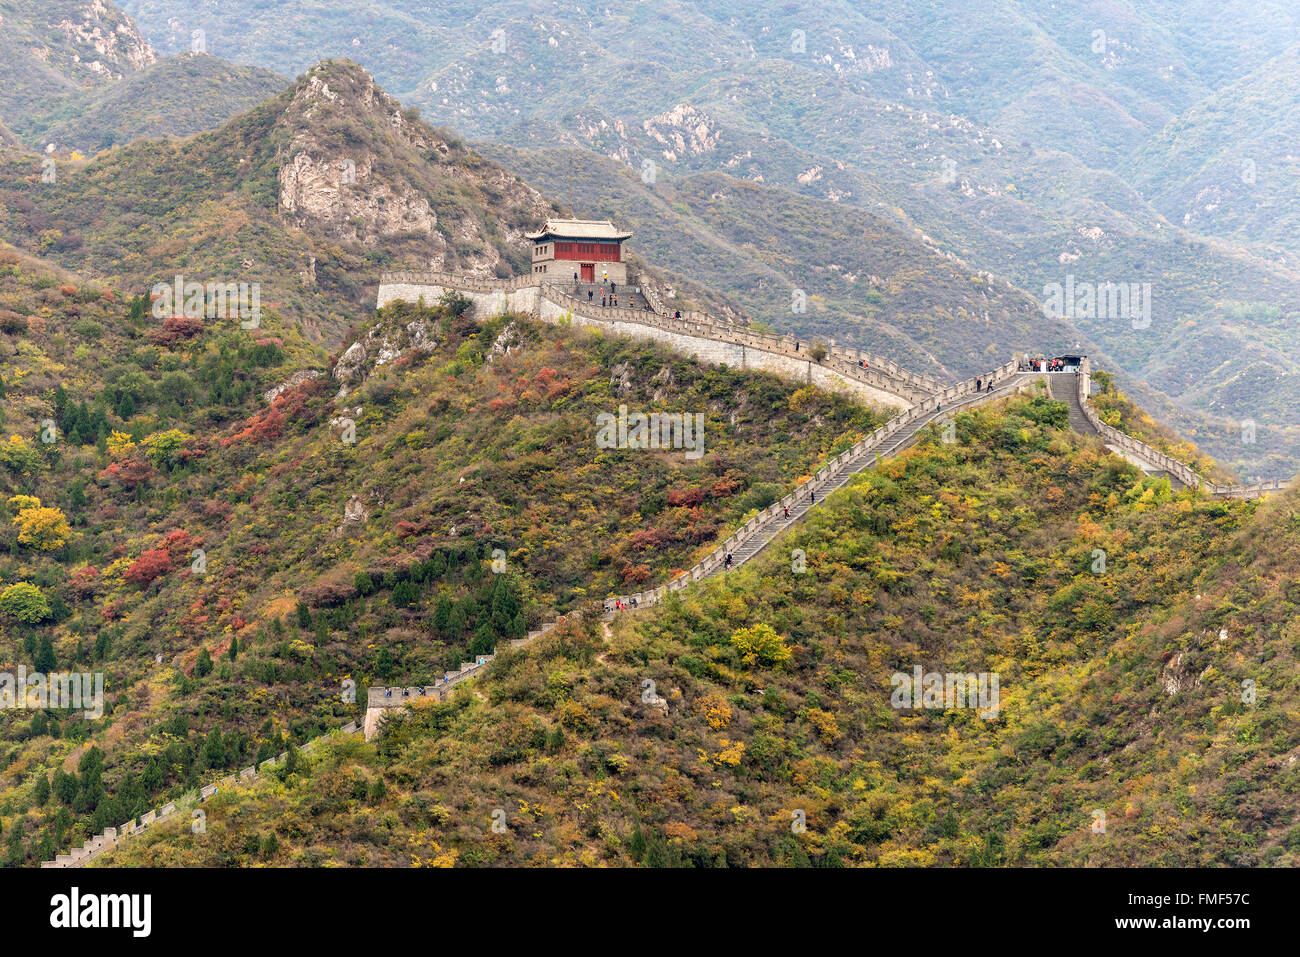 A lot of tourists (unrecognizable) visit the Great Wall of China and admiring the architectural 'miracle' Stock Photo